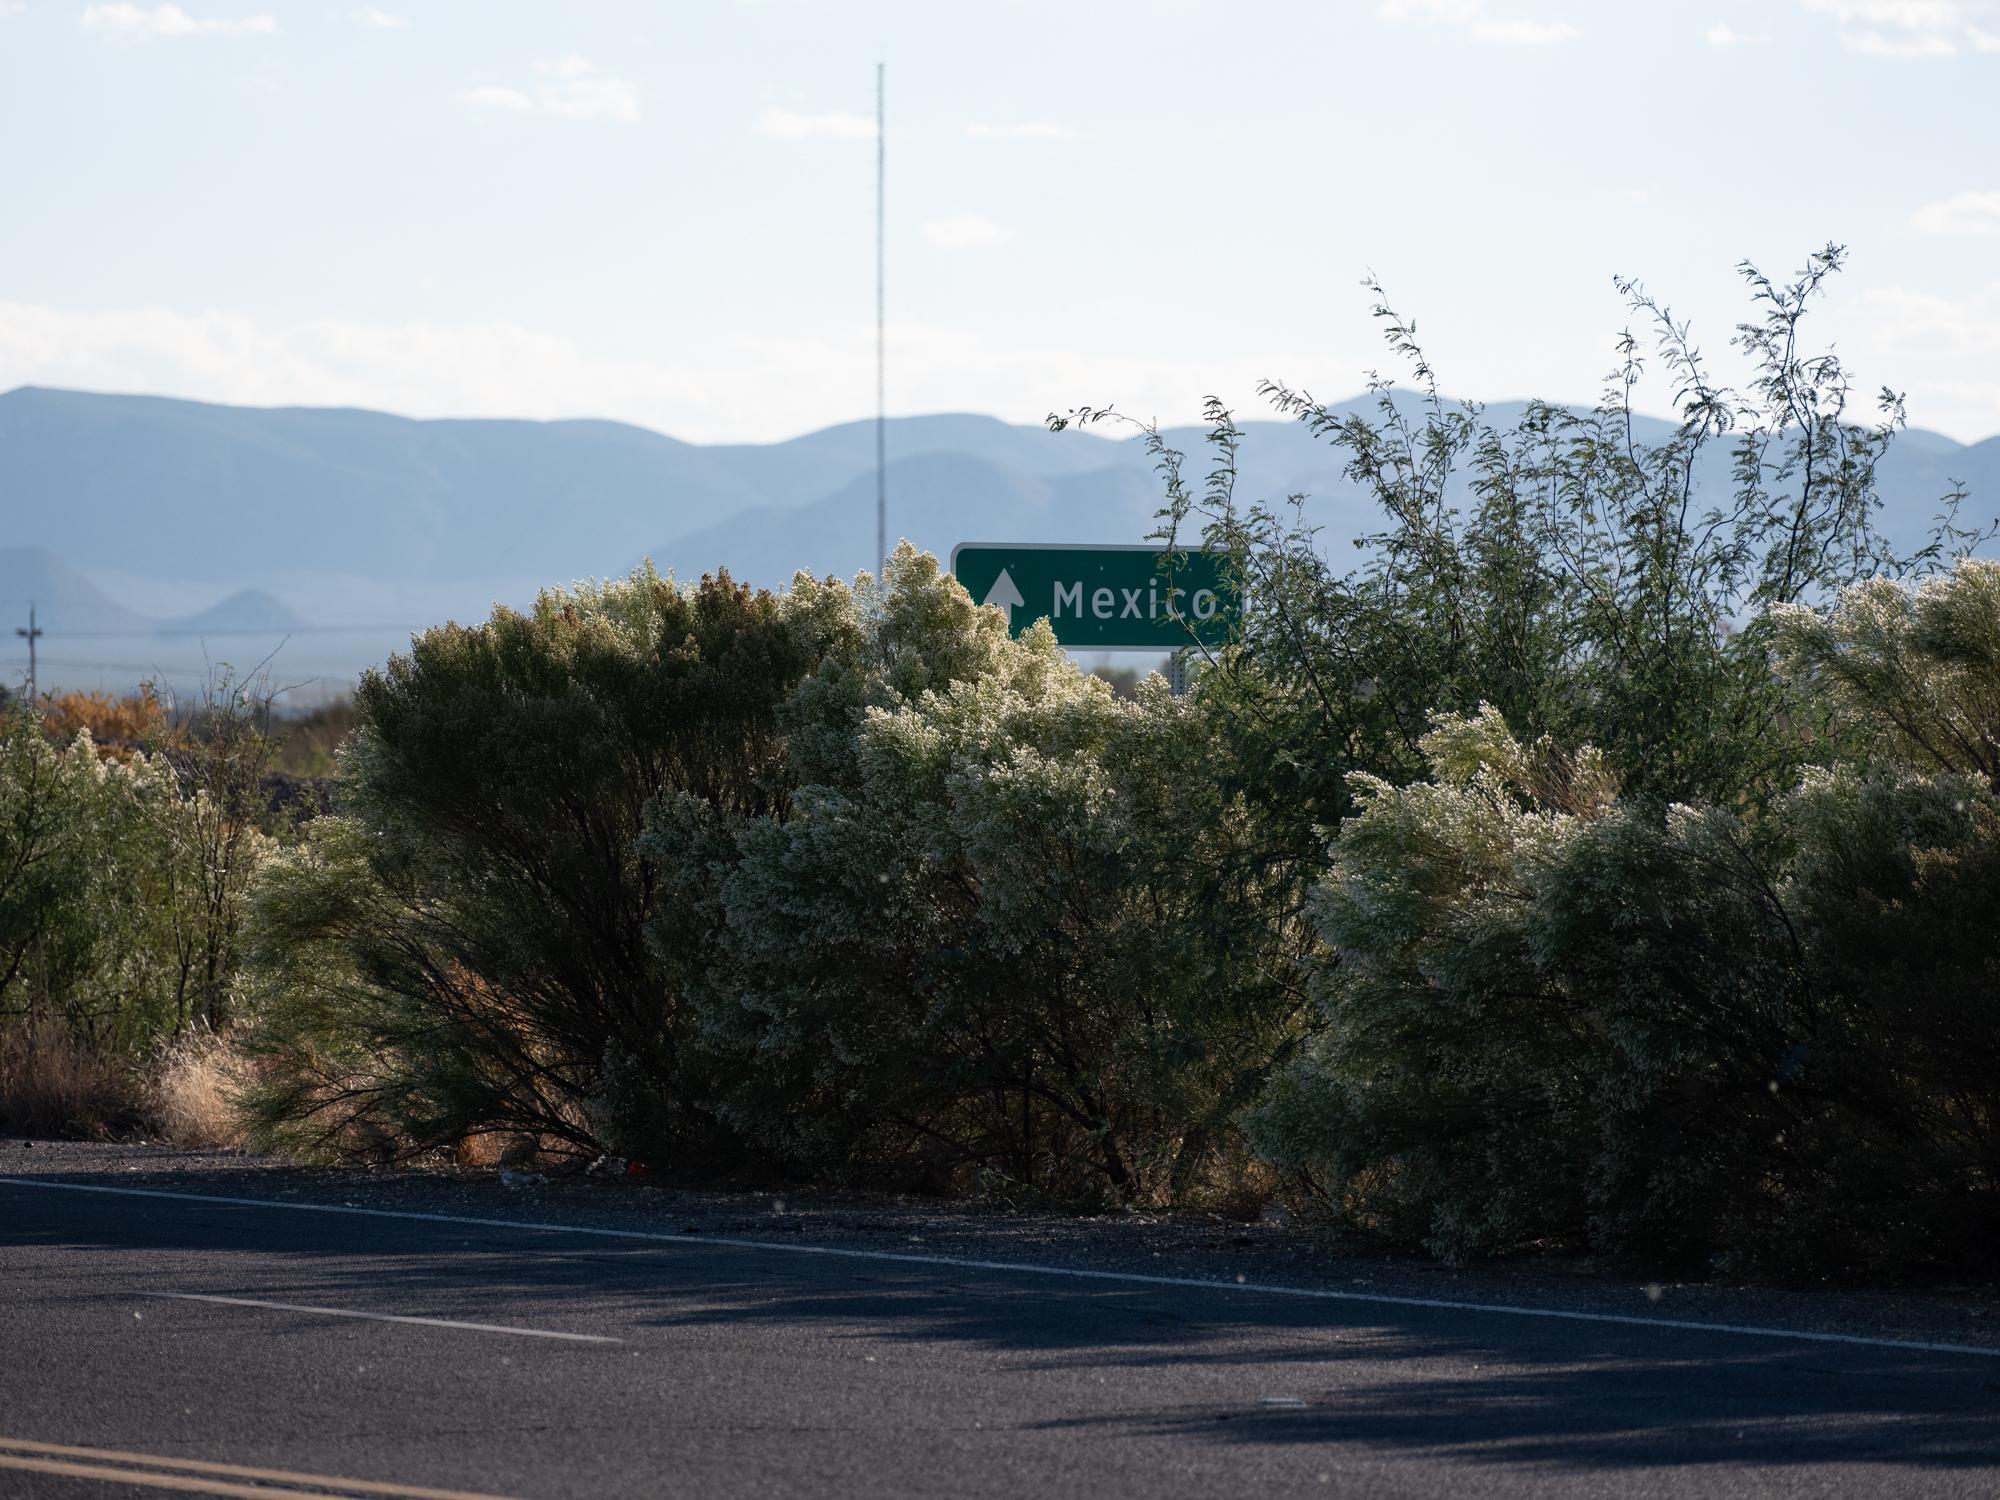 Social Media Migrant Smuggling - Bloomberg Businessweek - A sign directs vehicles heading for Mexico in Douglas, AZ. 